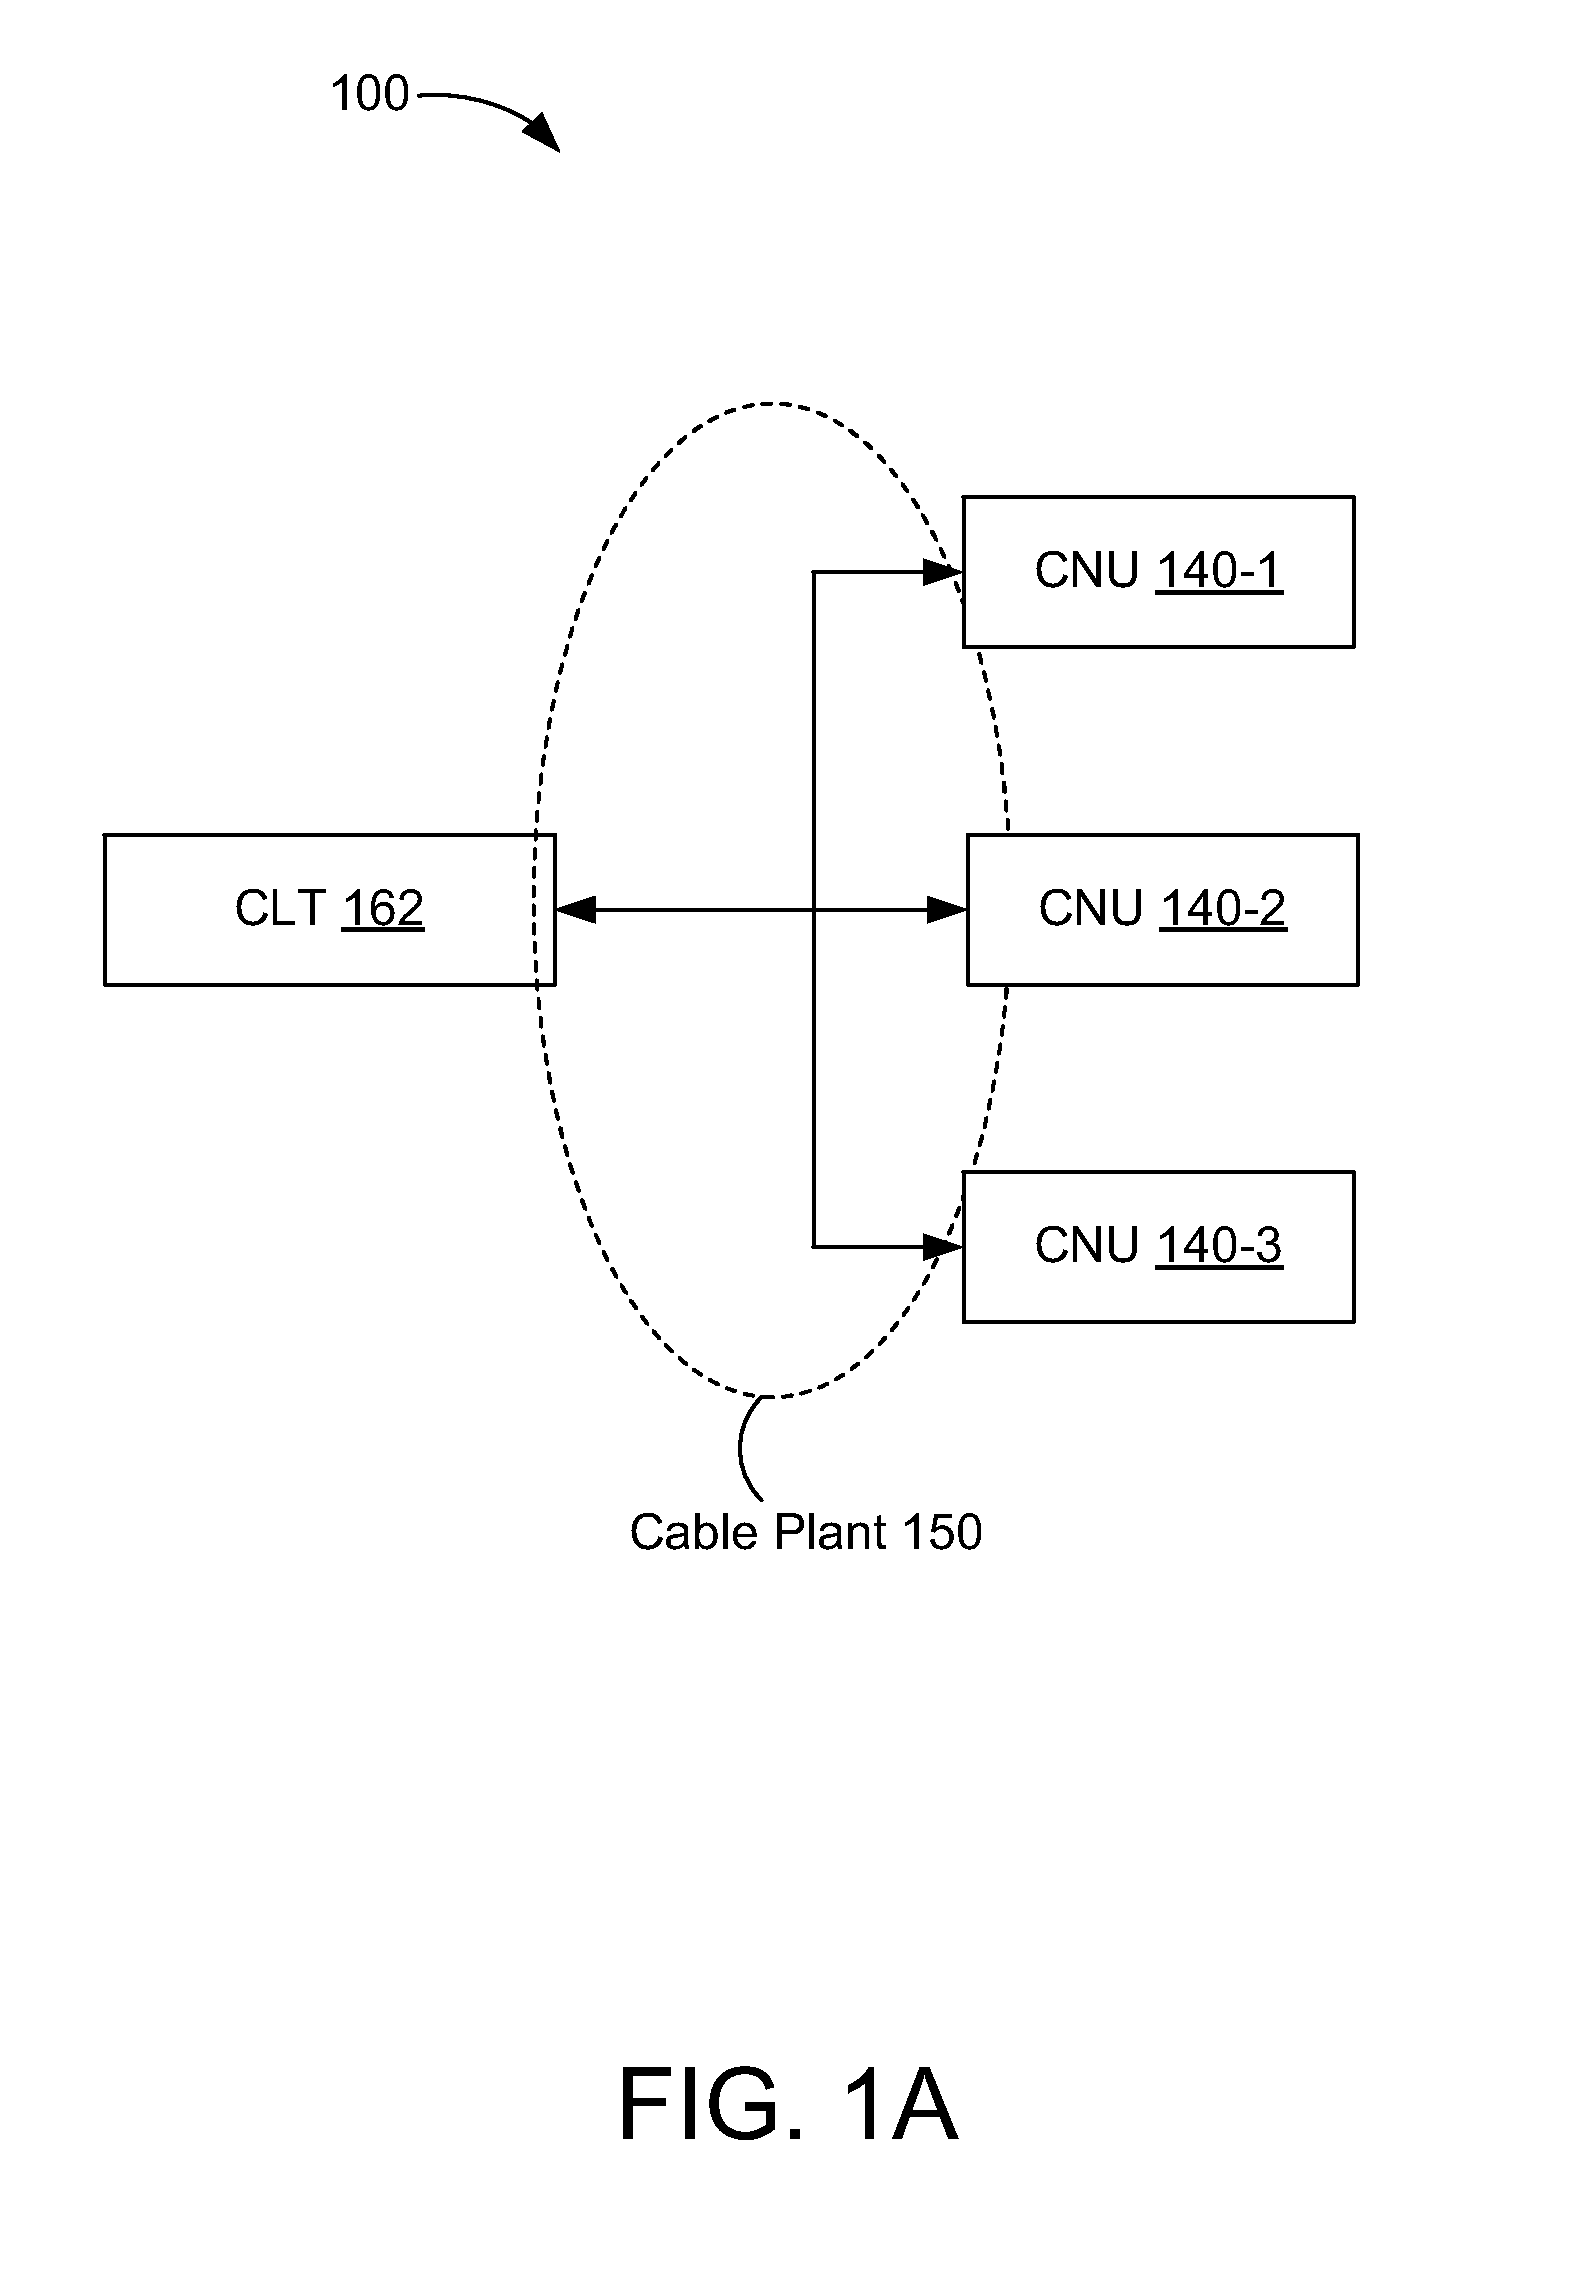 Methods and systems of specifying coaxial resource allocation across a mac/phy interface